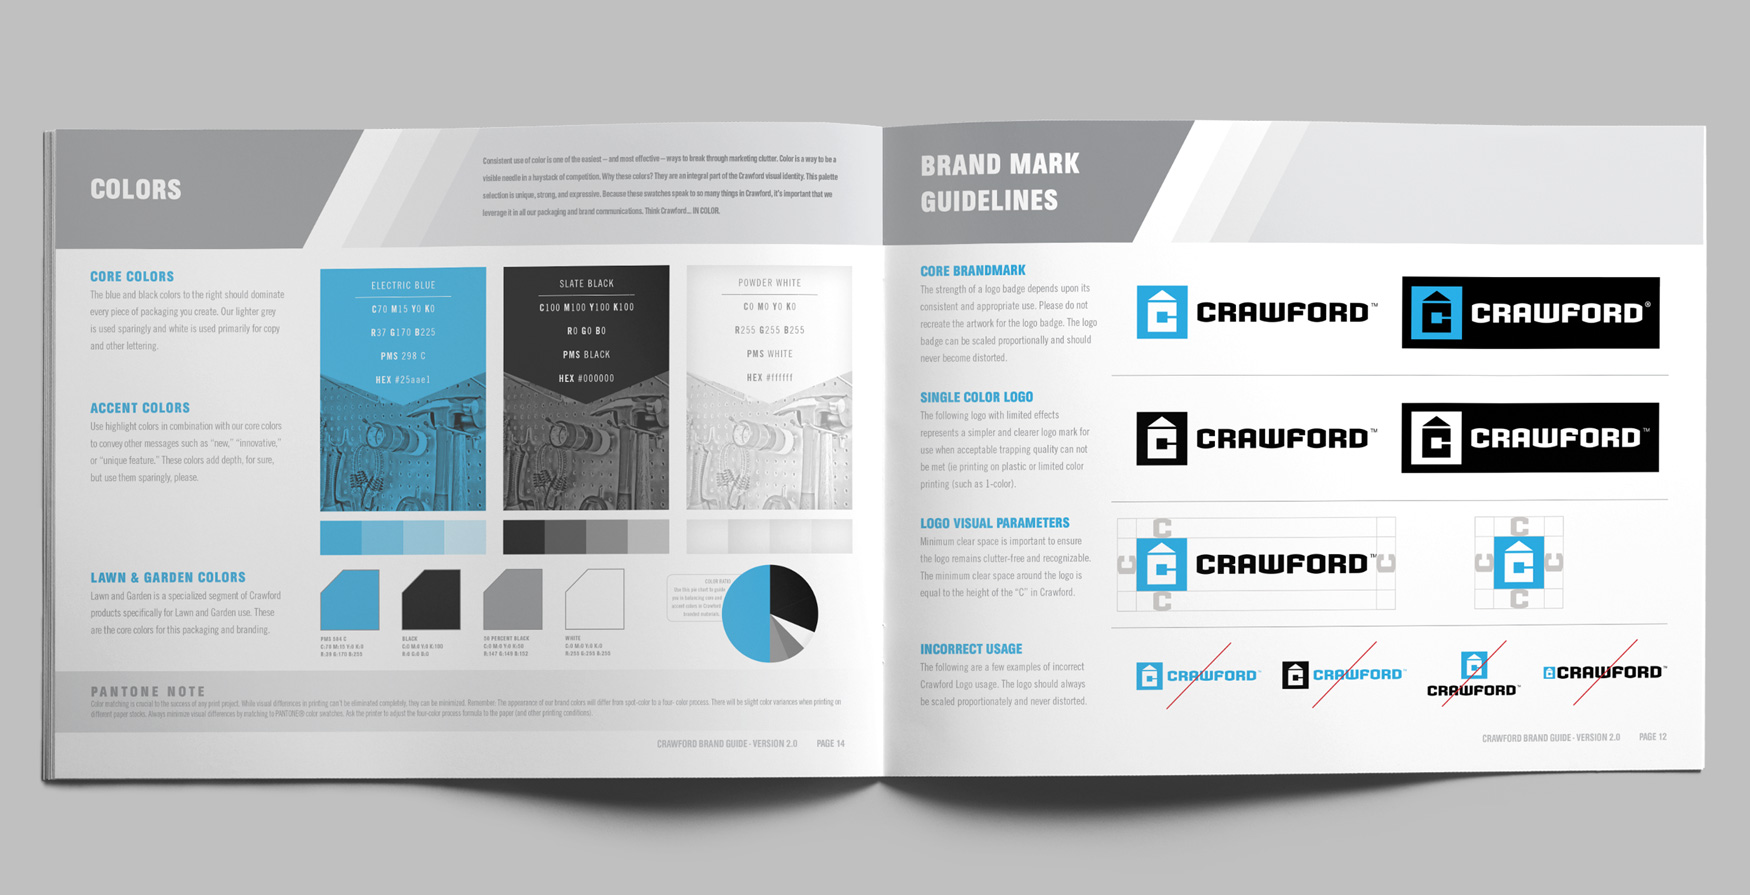 crawford-brand-guide-book-design-interior-page-layout-branding-clean-hardware-industrial-graphic-design-guidelines-2